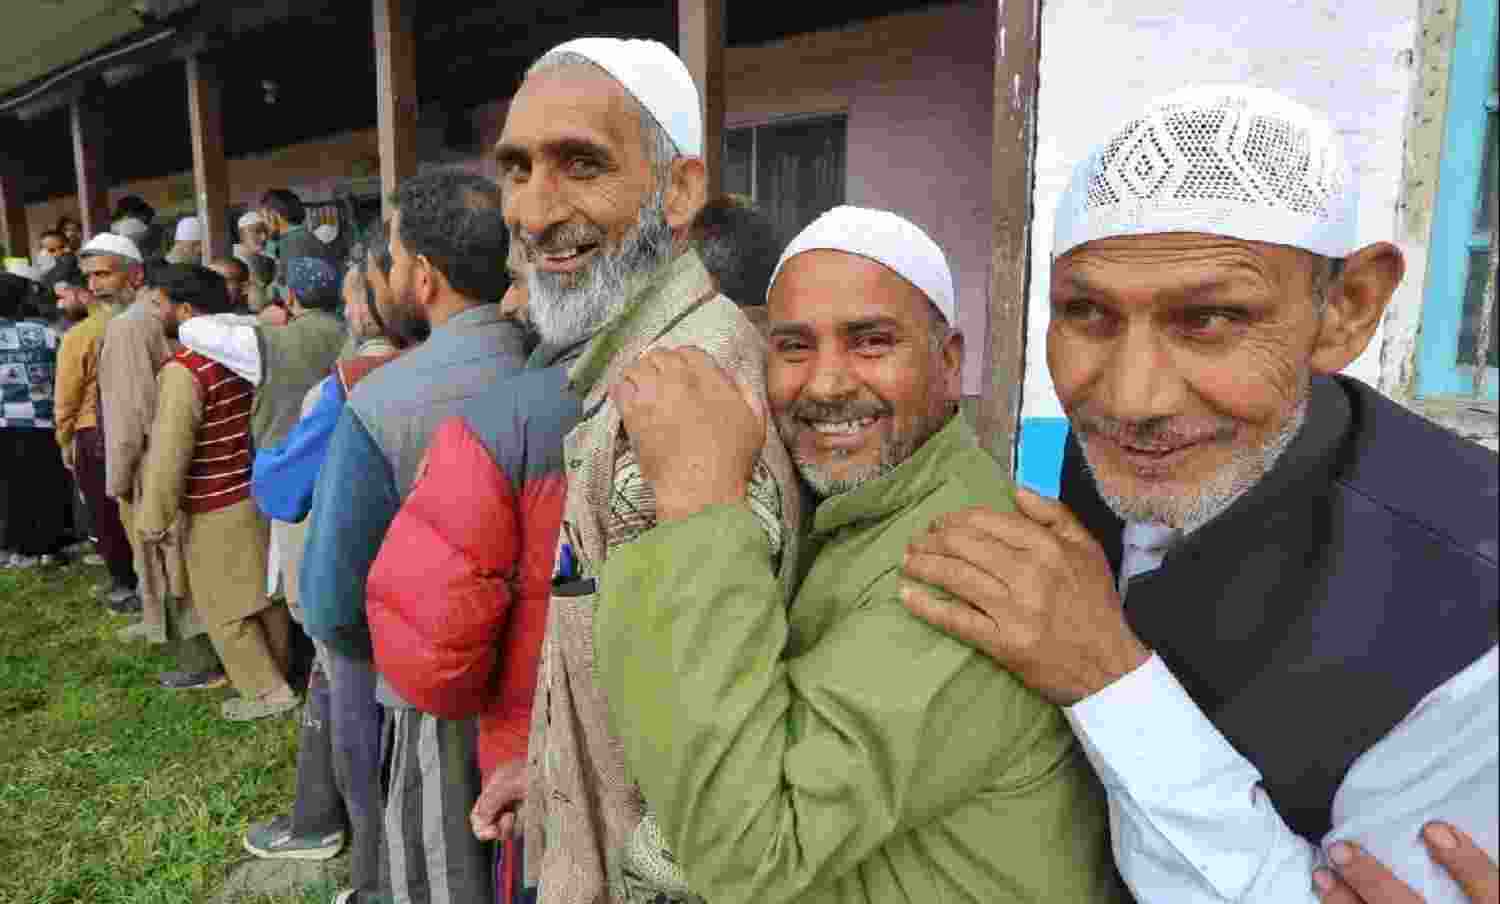 At 38%, Srinagar records its highest voter turnout since 1989